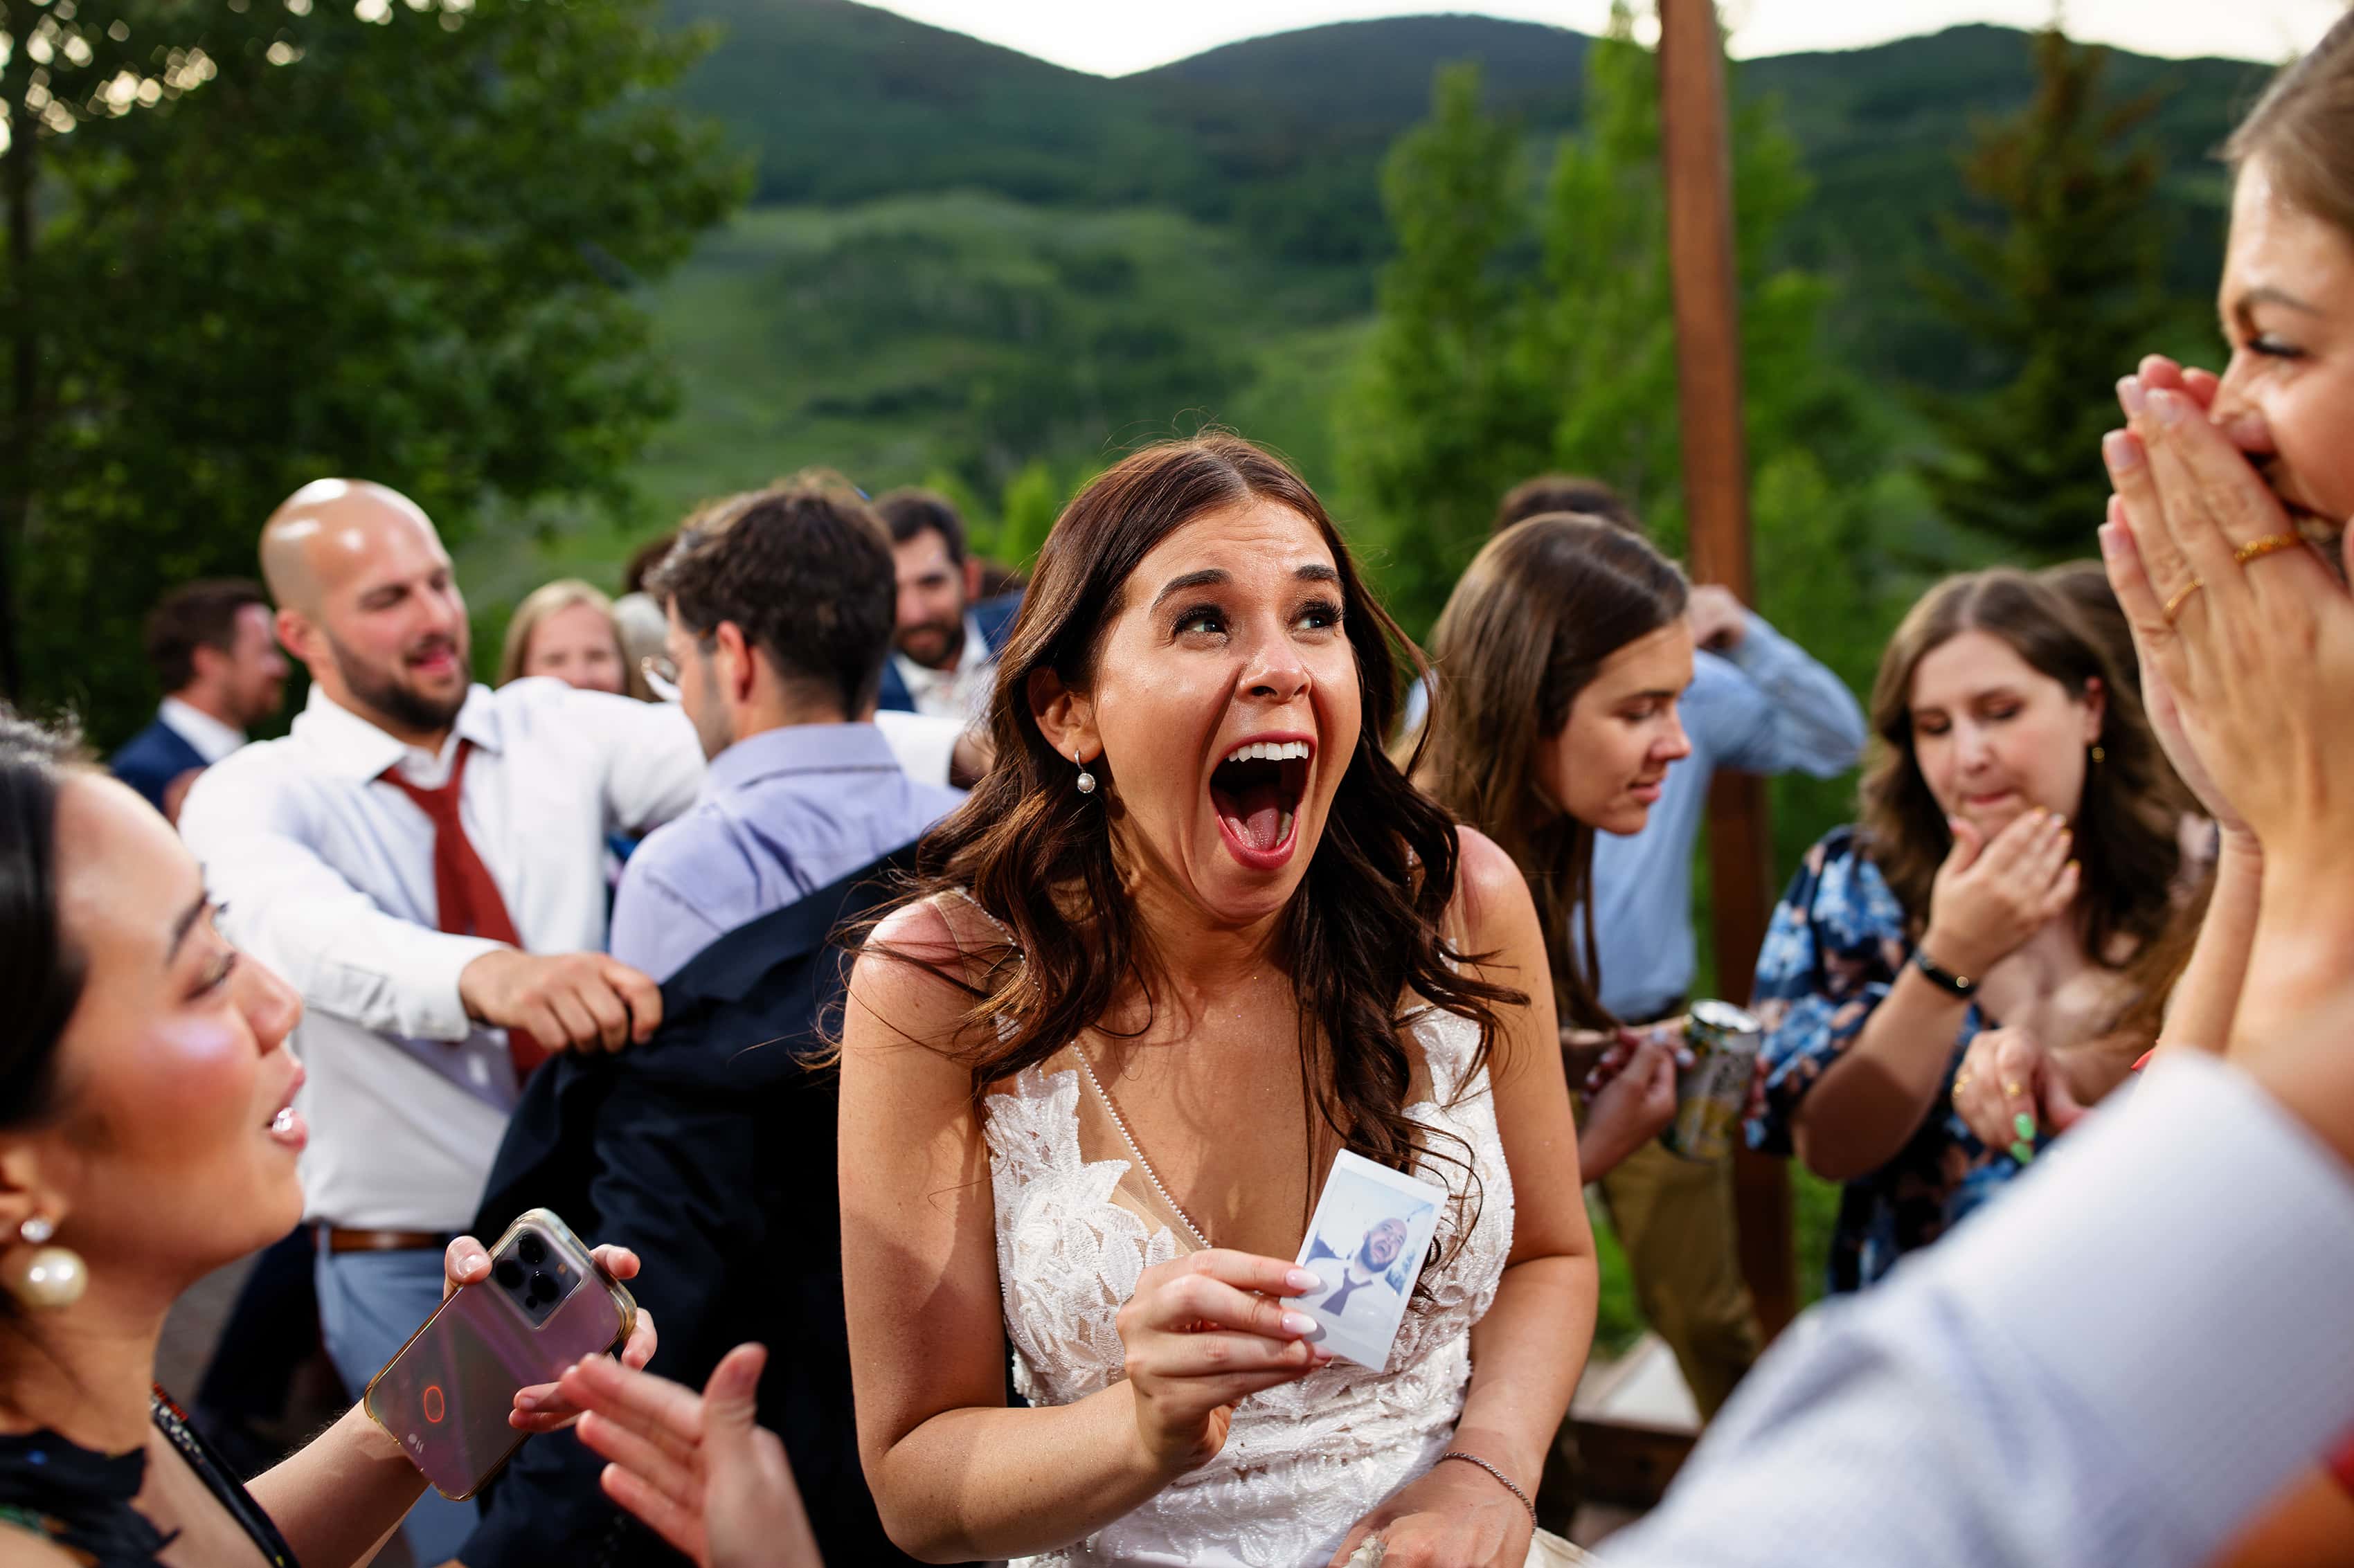 The bride reacts after taking a polaroid of the groom